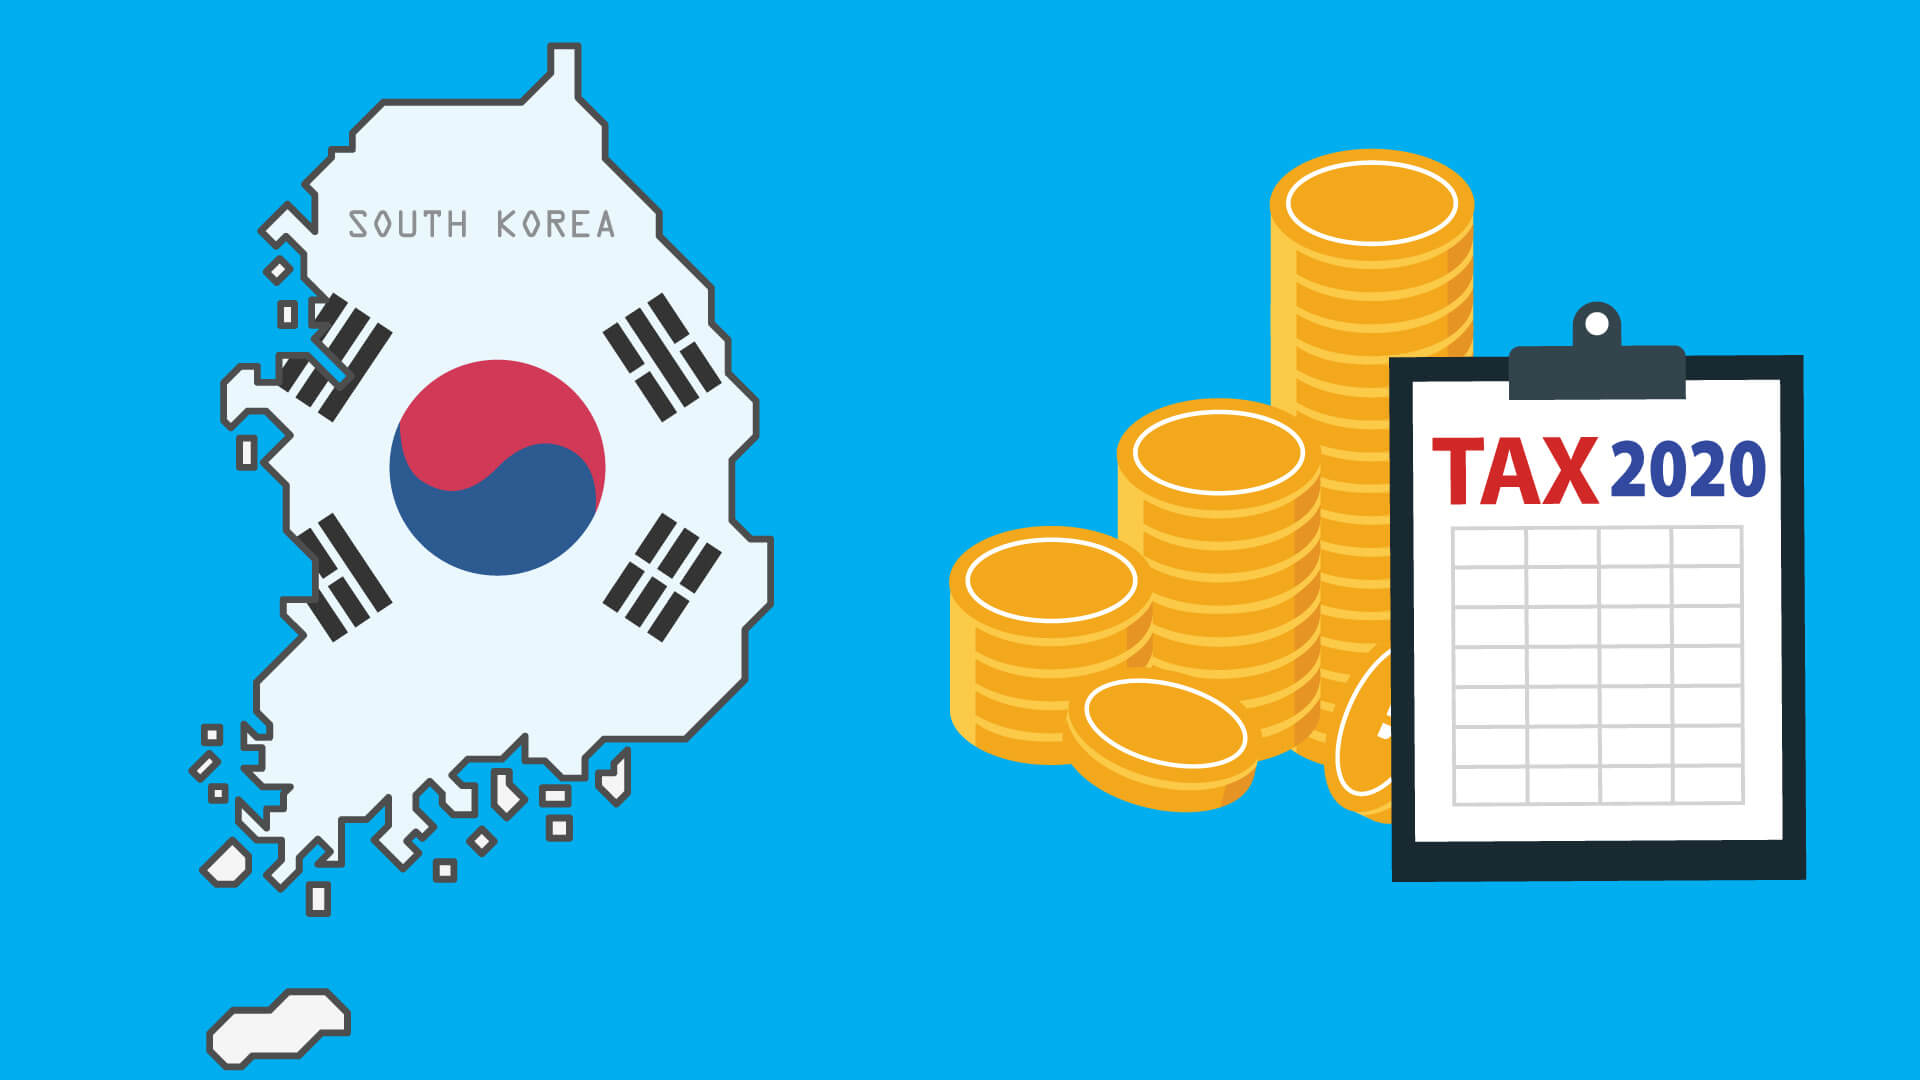 South Korea Decides to Mobilize Its Taxation Policies for 2020